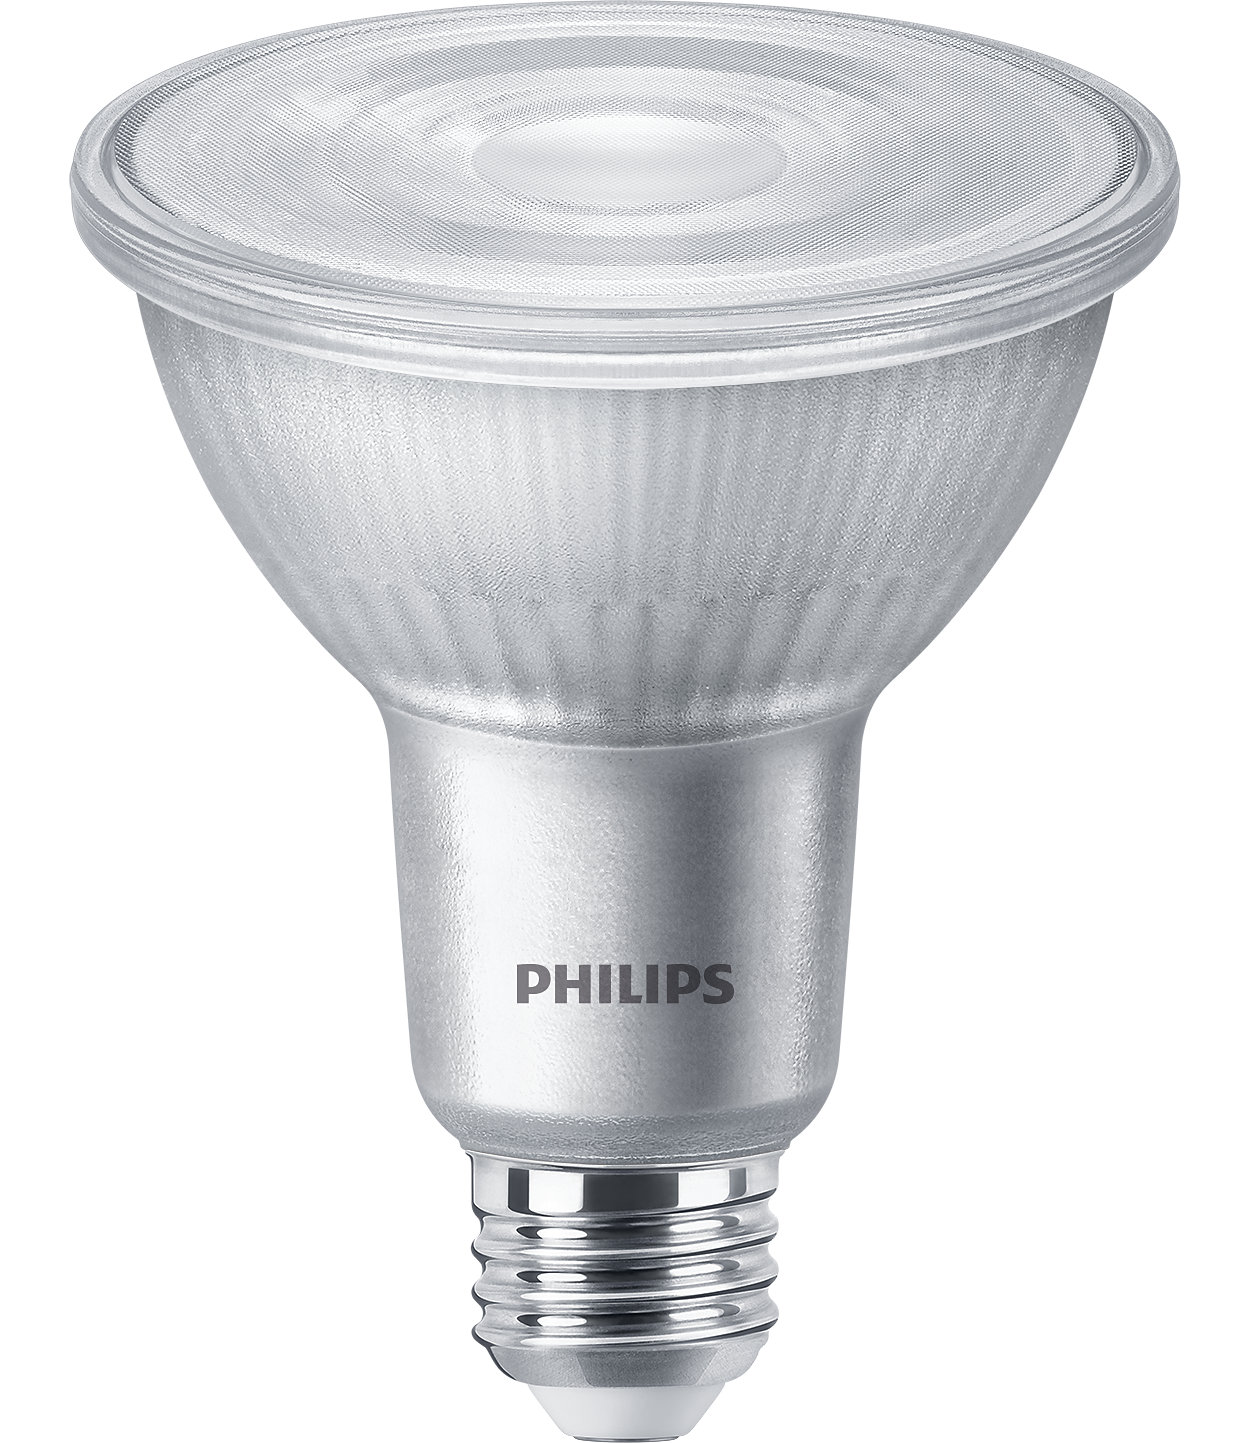 Dimmable LED spot with excellent light quality